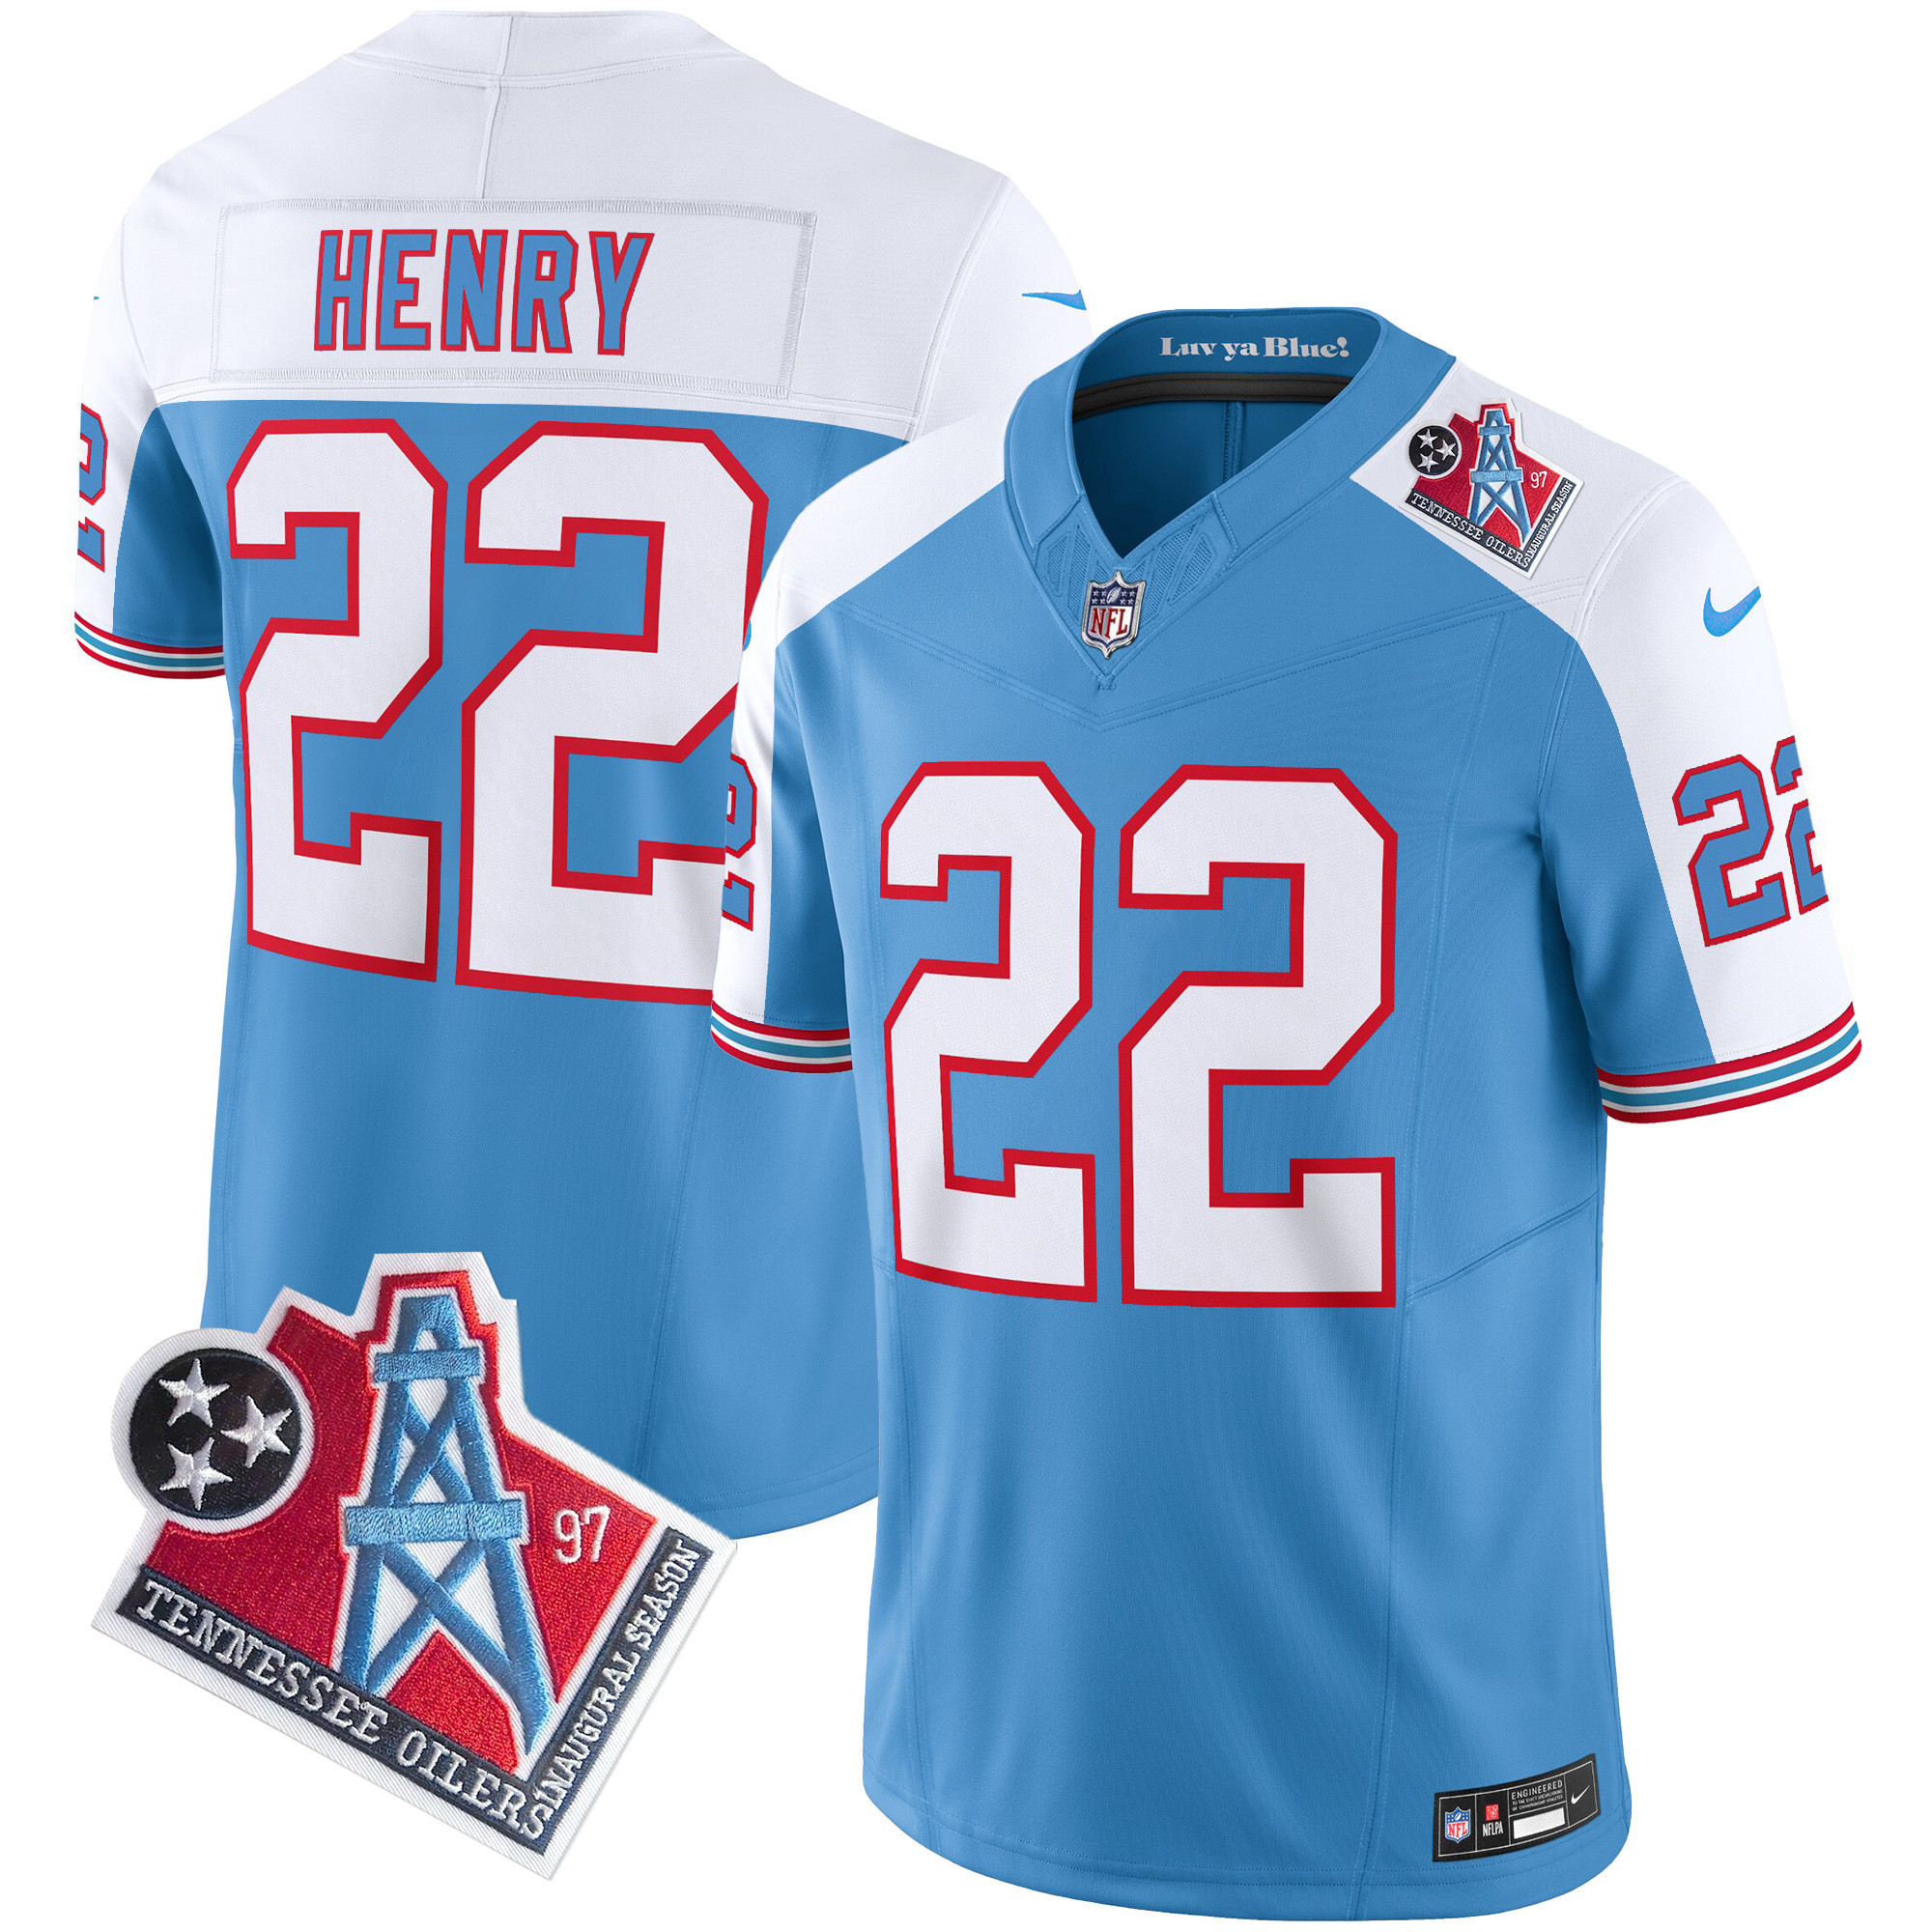 Men's Titans 1997 Throwback Limited Cool Base Jersey - All